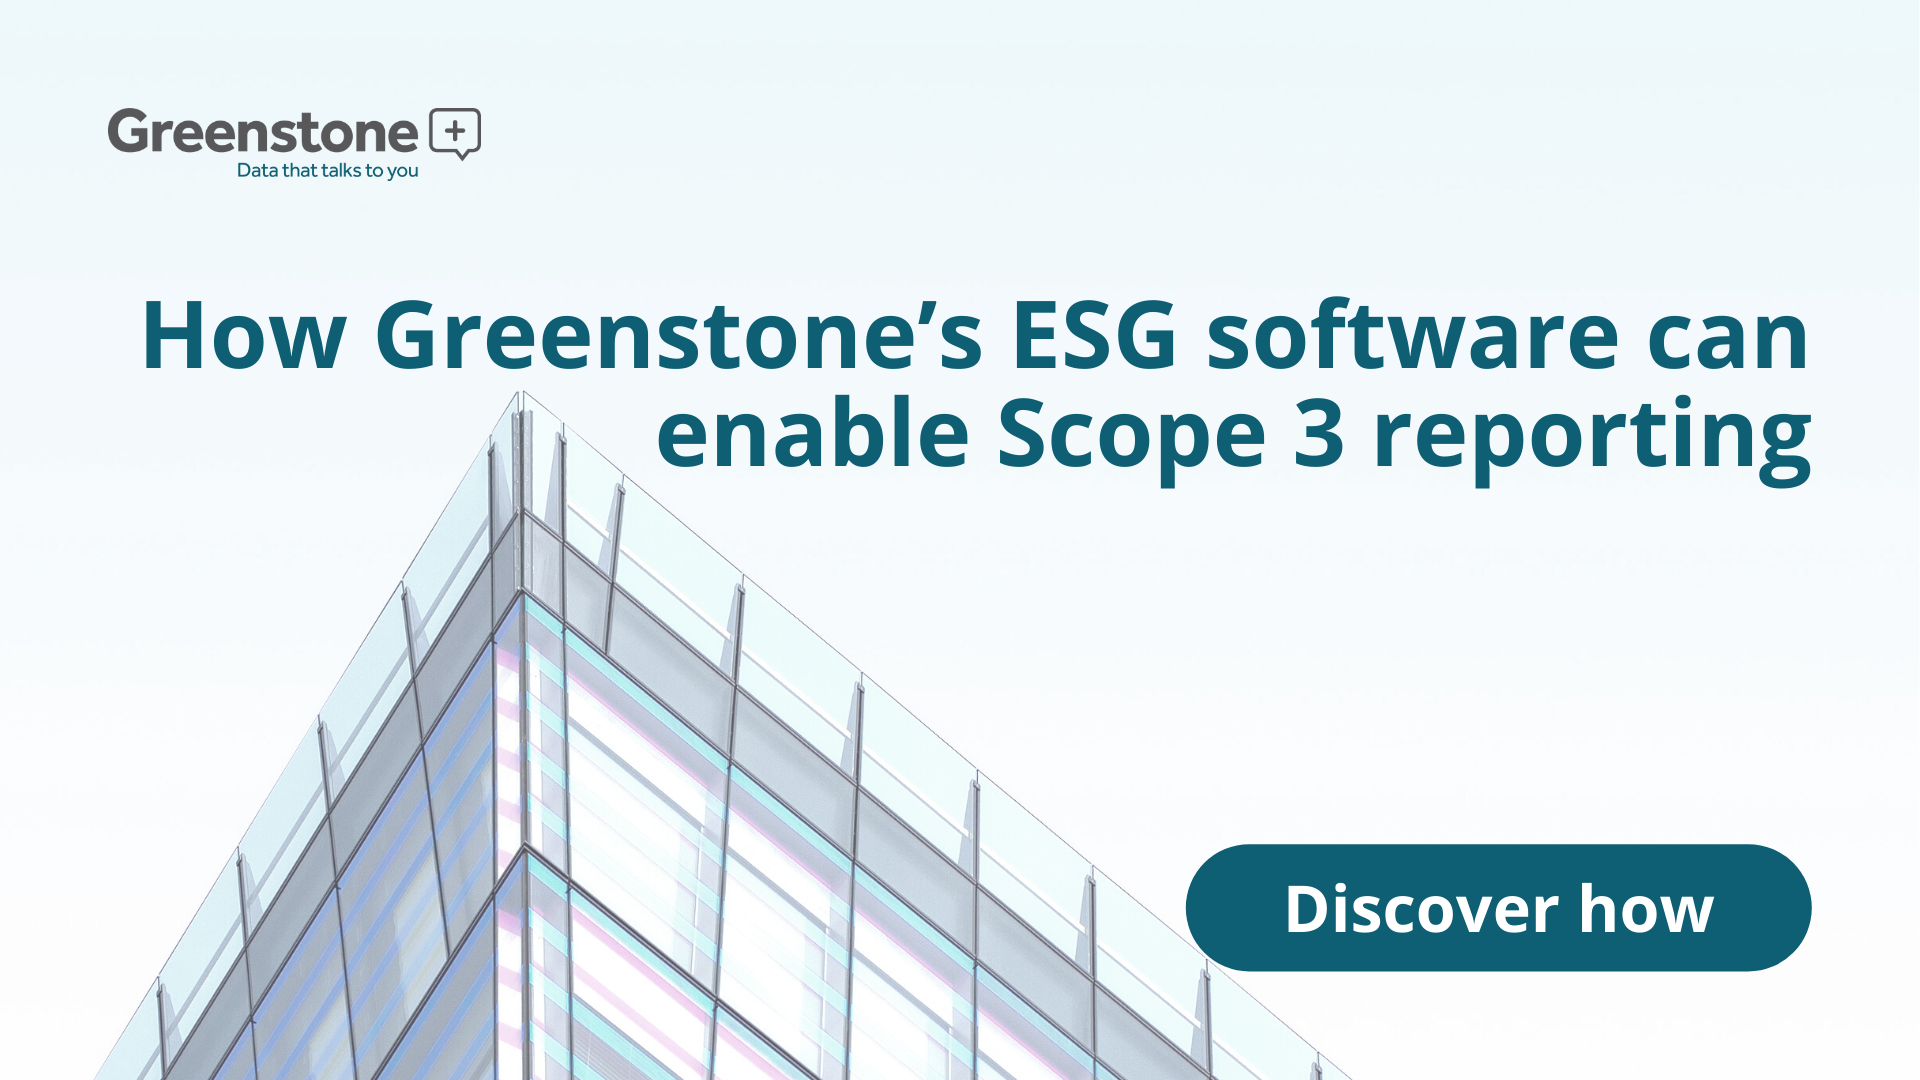 How Greenstone’s ESG software can enable Scope 3 reporting